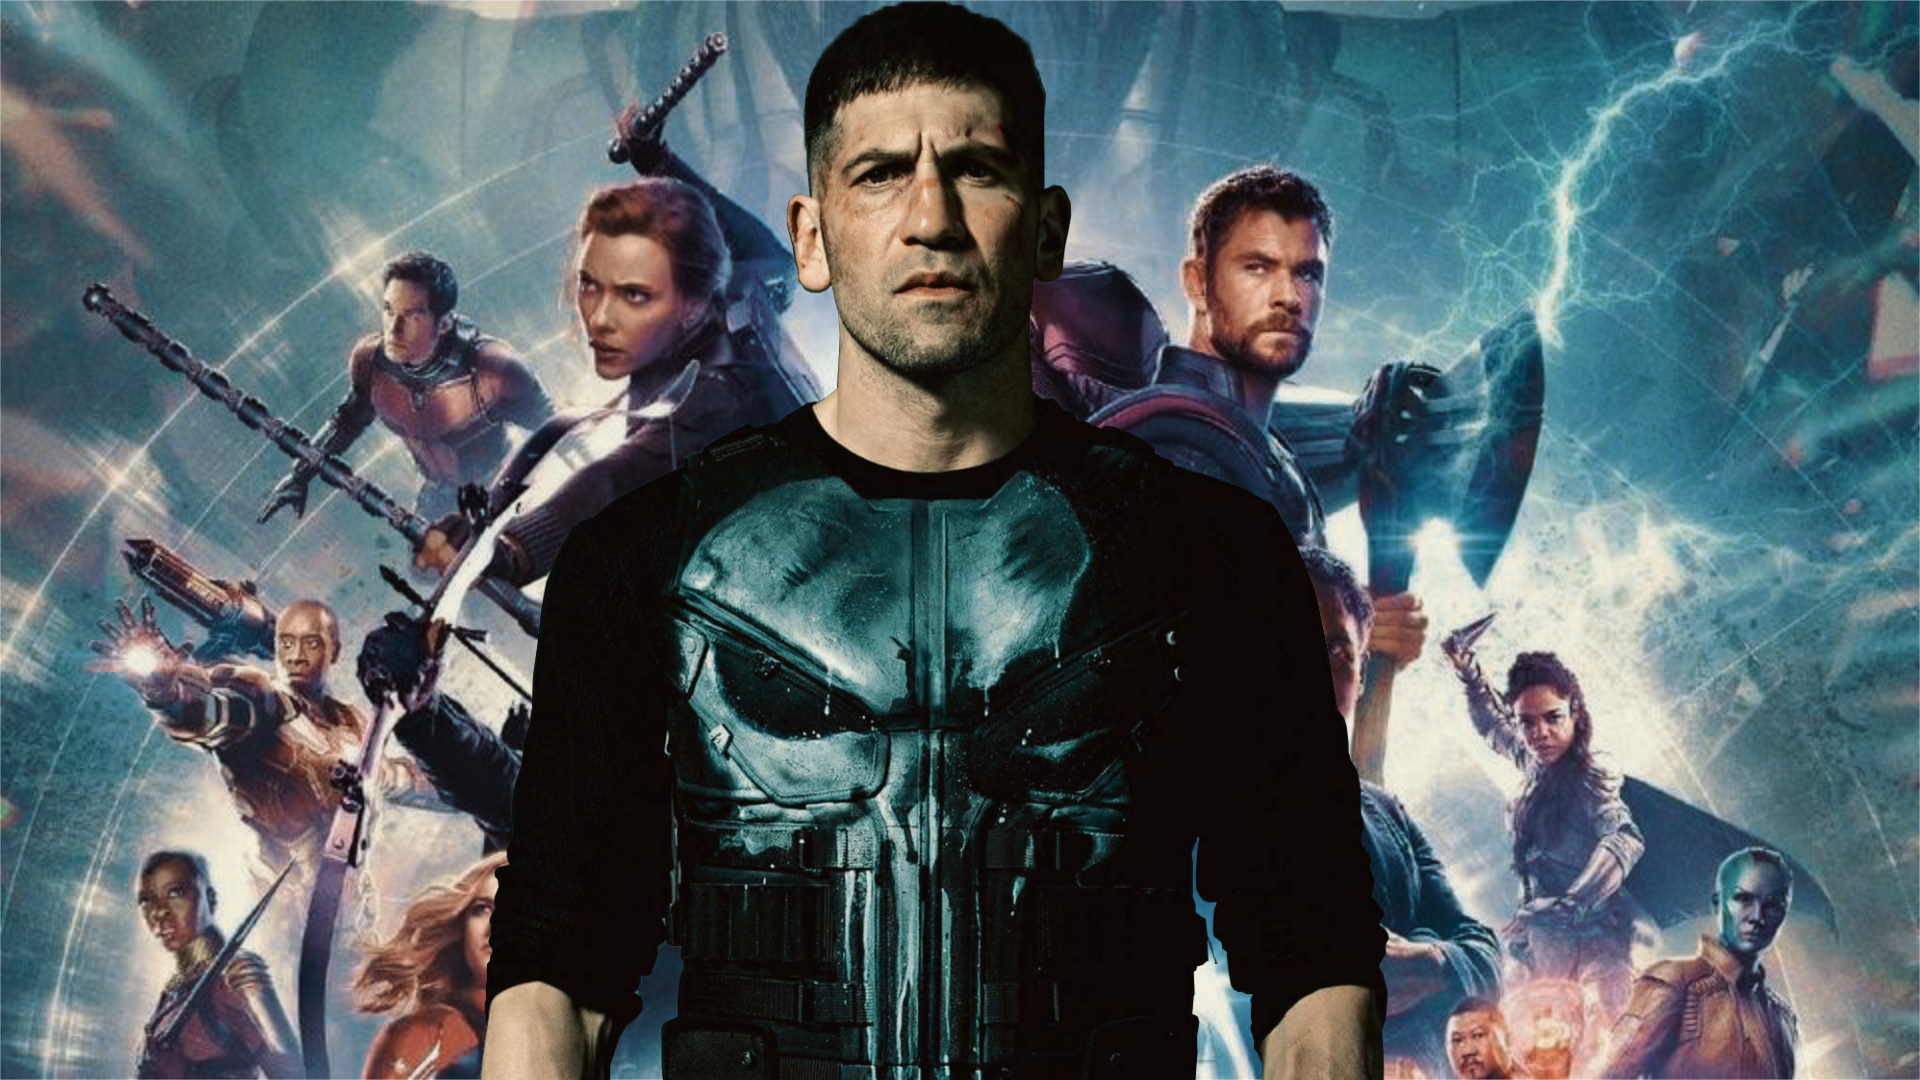 Jon Bernthal Wants to Join the MCU as The Punisher